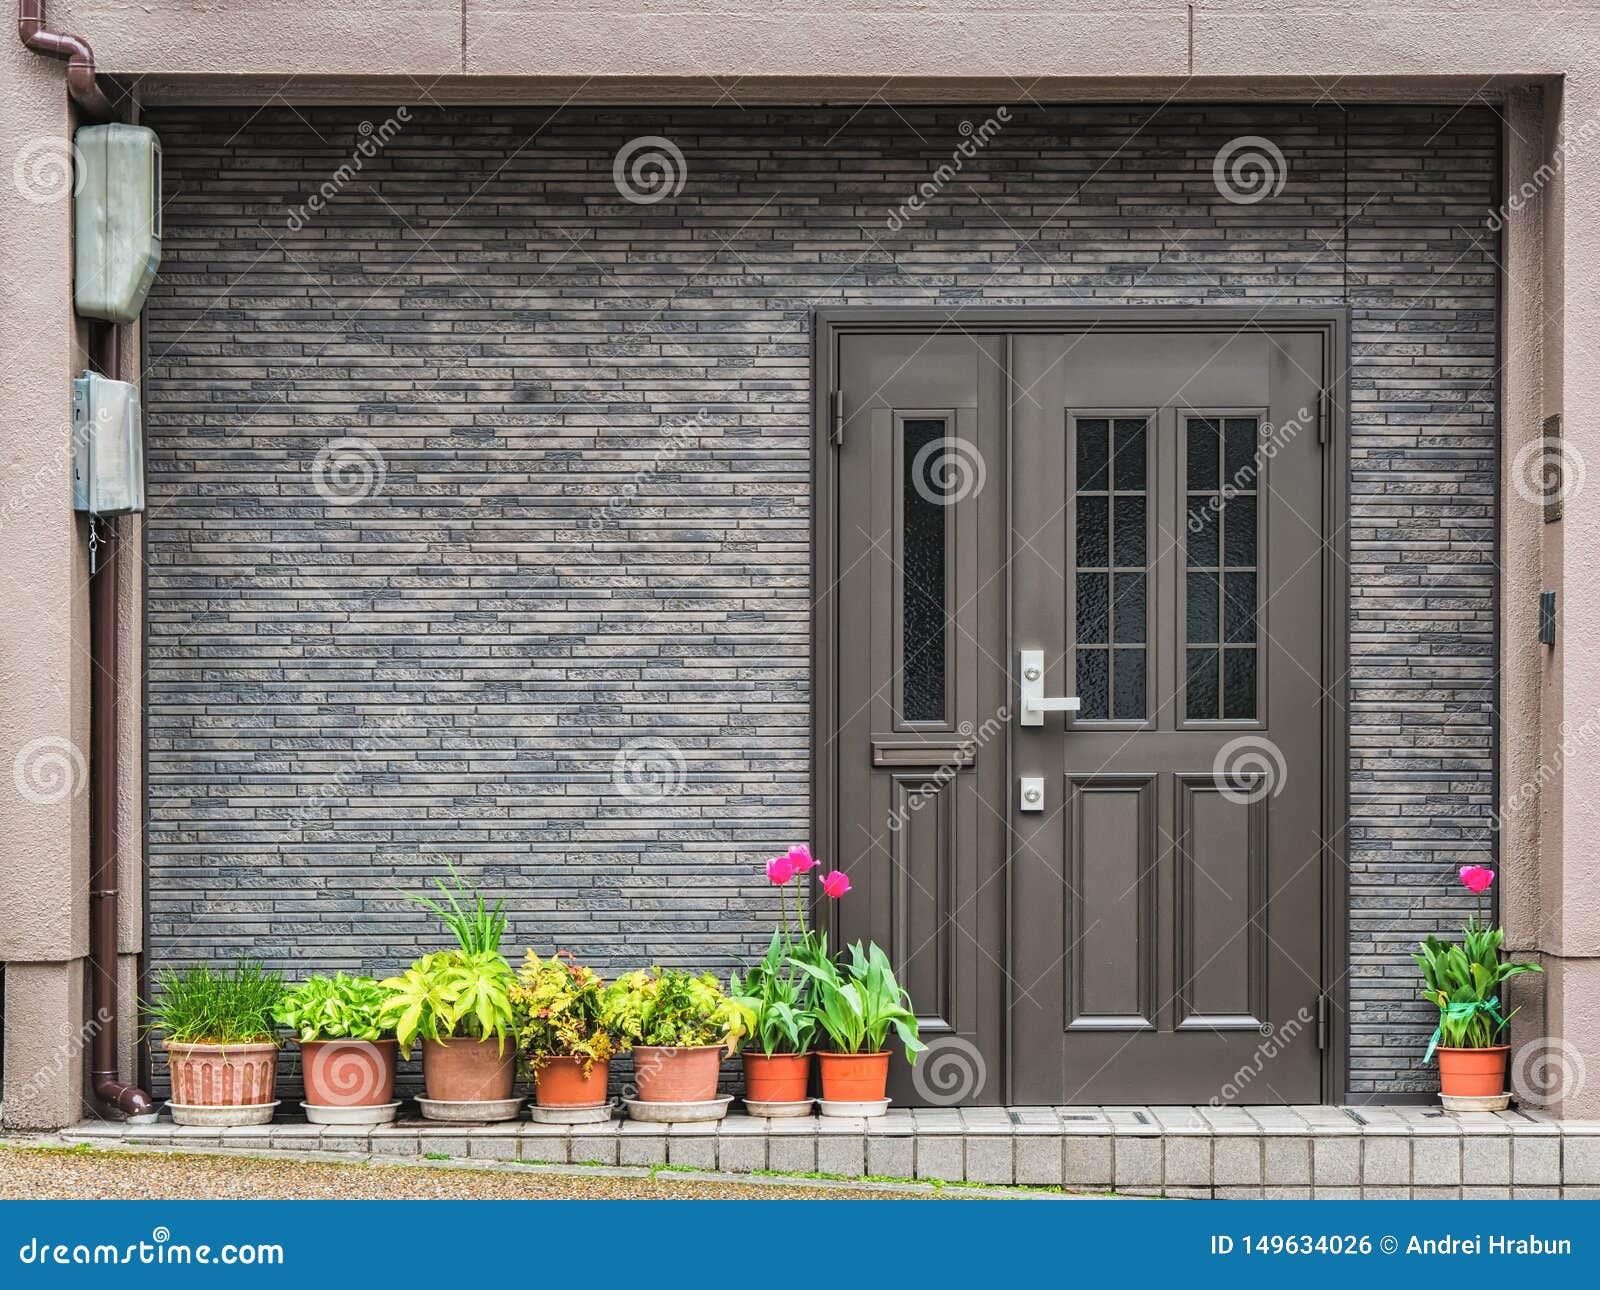 gray front door with small square decorative windows and flower pots in fron of it